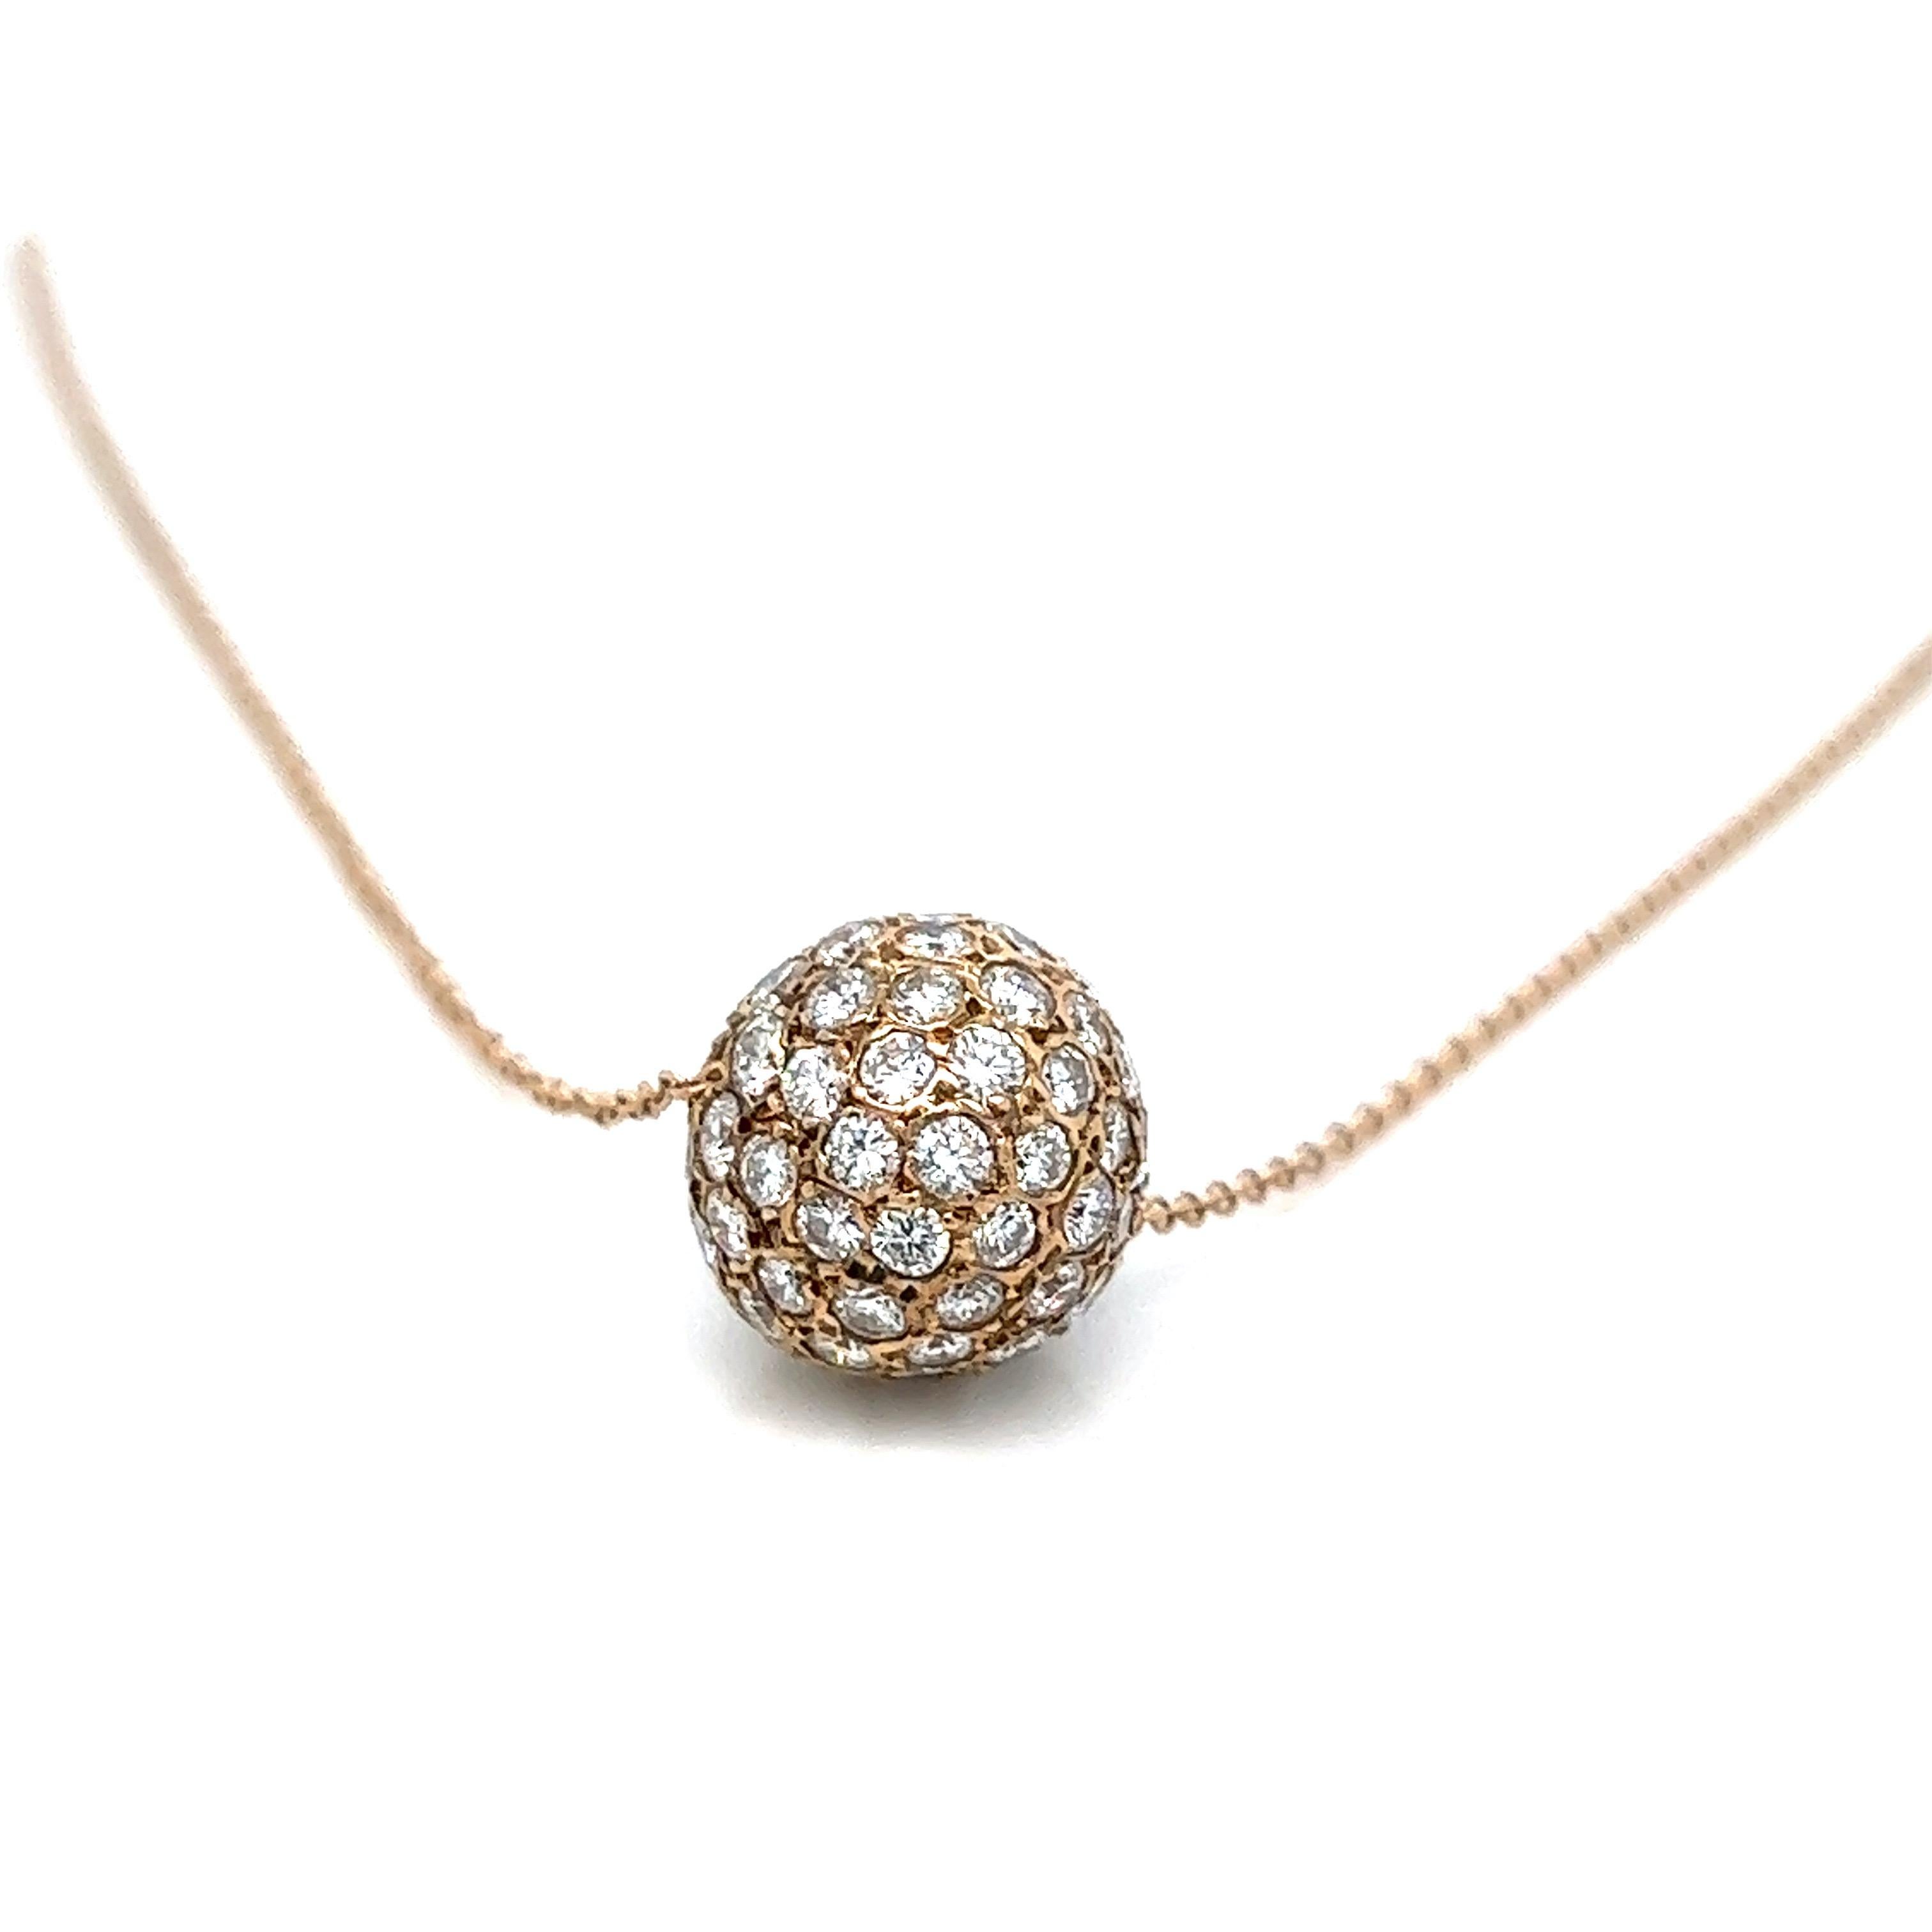 Tiffany & Co. diamond ball pendant necklace 

Round-cut diamonds of approximately 2.5-3 carats, 18 karat yellow gold; marked Tiffany & Co., Au750

Size: ball width 11 mm, chain length 15.5 inches
Total weight: 4.7 grams